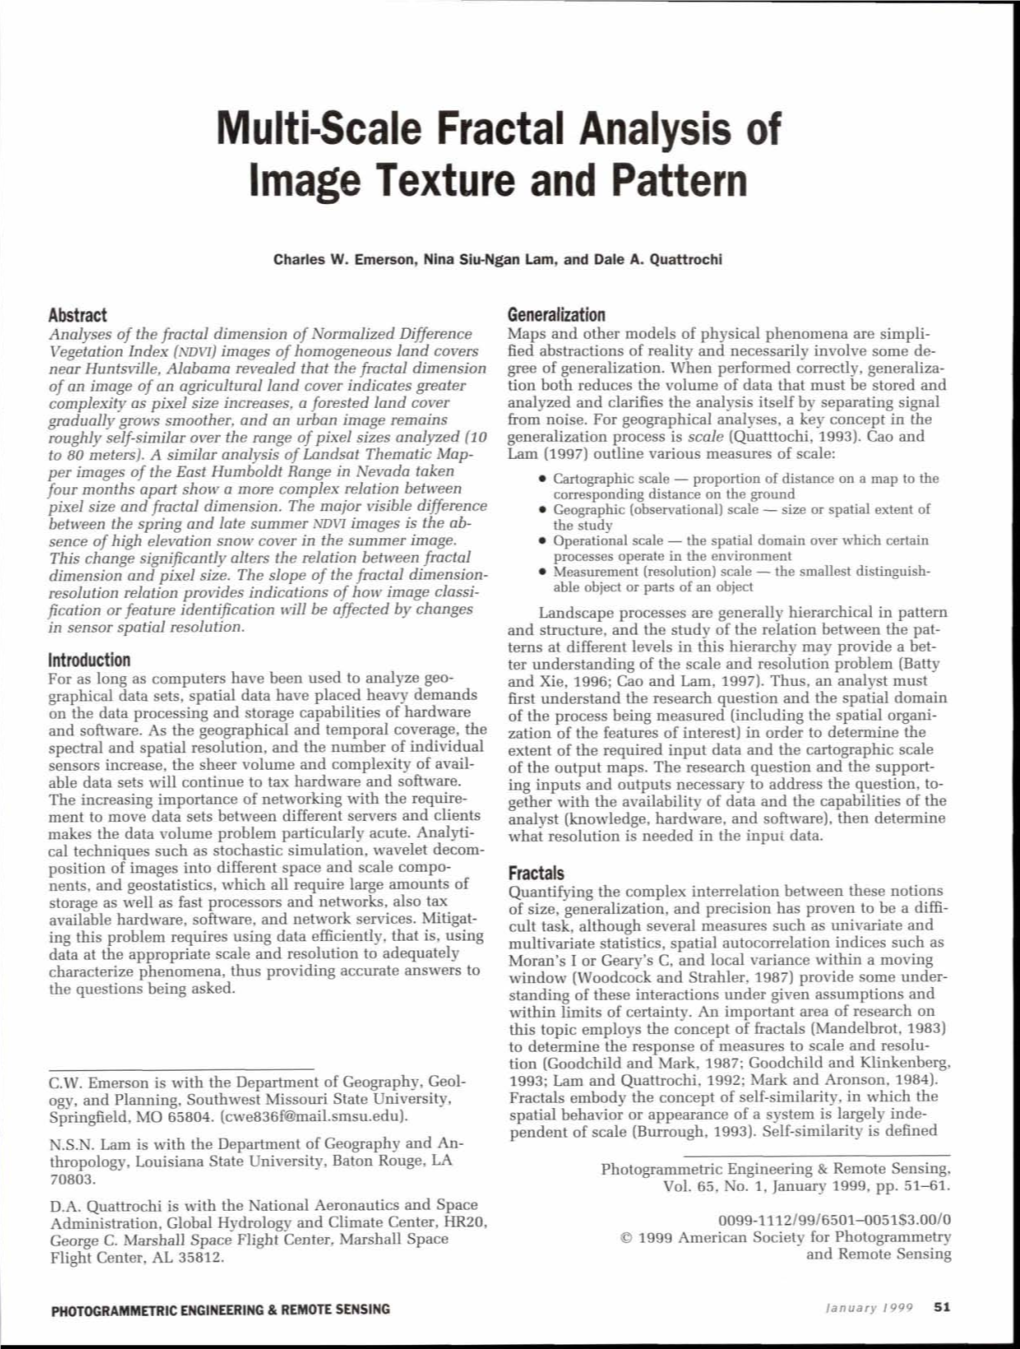 Multi-Scale Fractal Analysis of Image Texture and Pattern